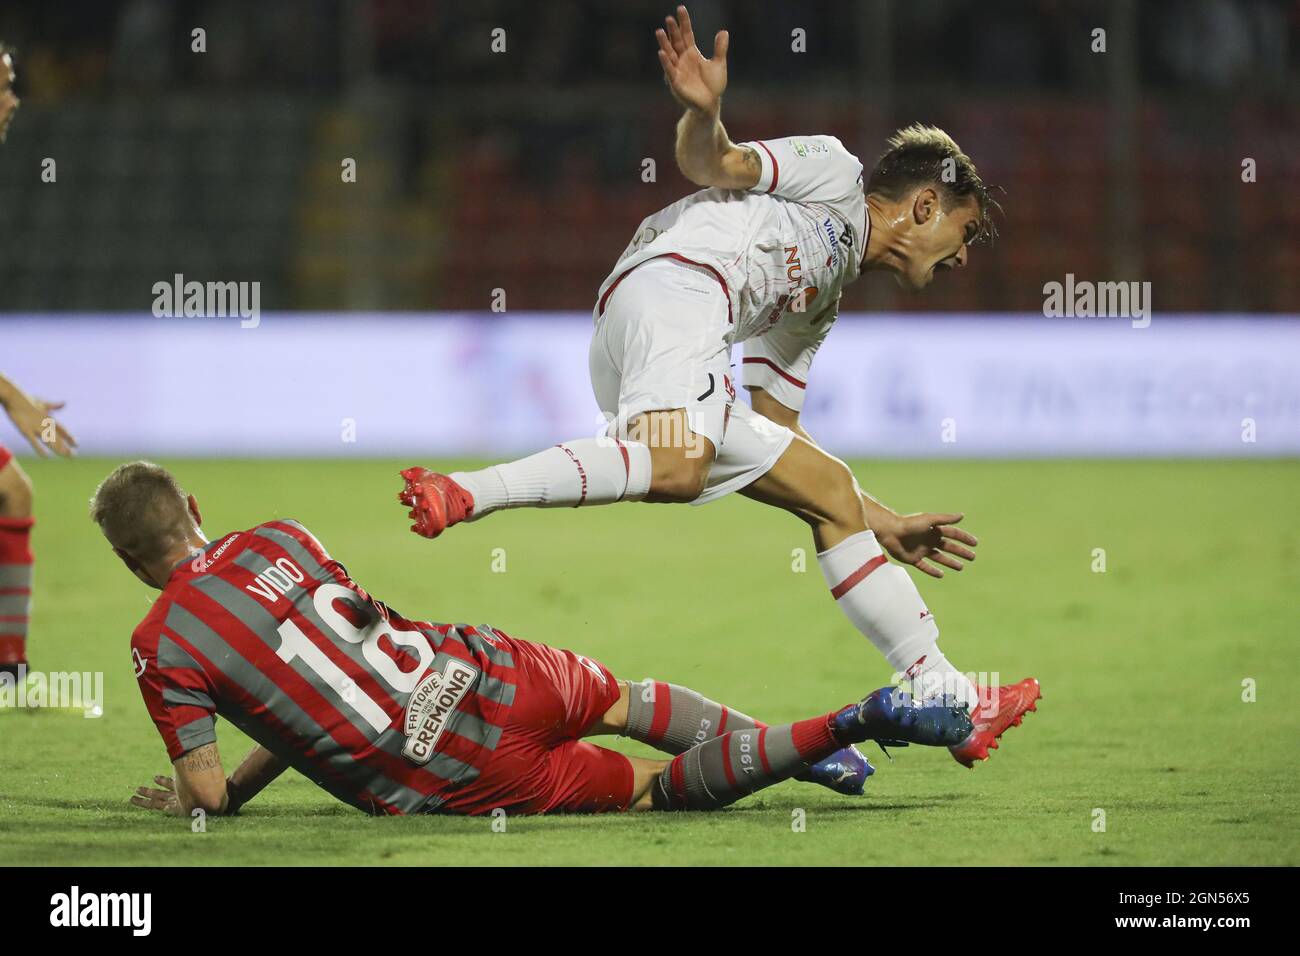 Cremona, Italy. 22nd Sep, 2021. Jacopo Sagre (Perugia) takes a foul against Luca Vido (Cremonese) during US Cremonese vs AC Perugia, Italian Football Championship League BKT in Cremona, Italy, September 22 2021 Credit: Independent Photo Agency/Alamy Live News Stock Photo